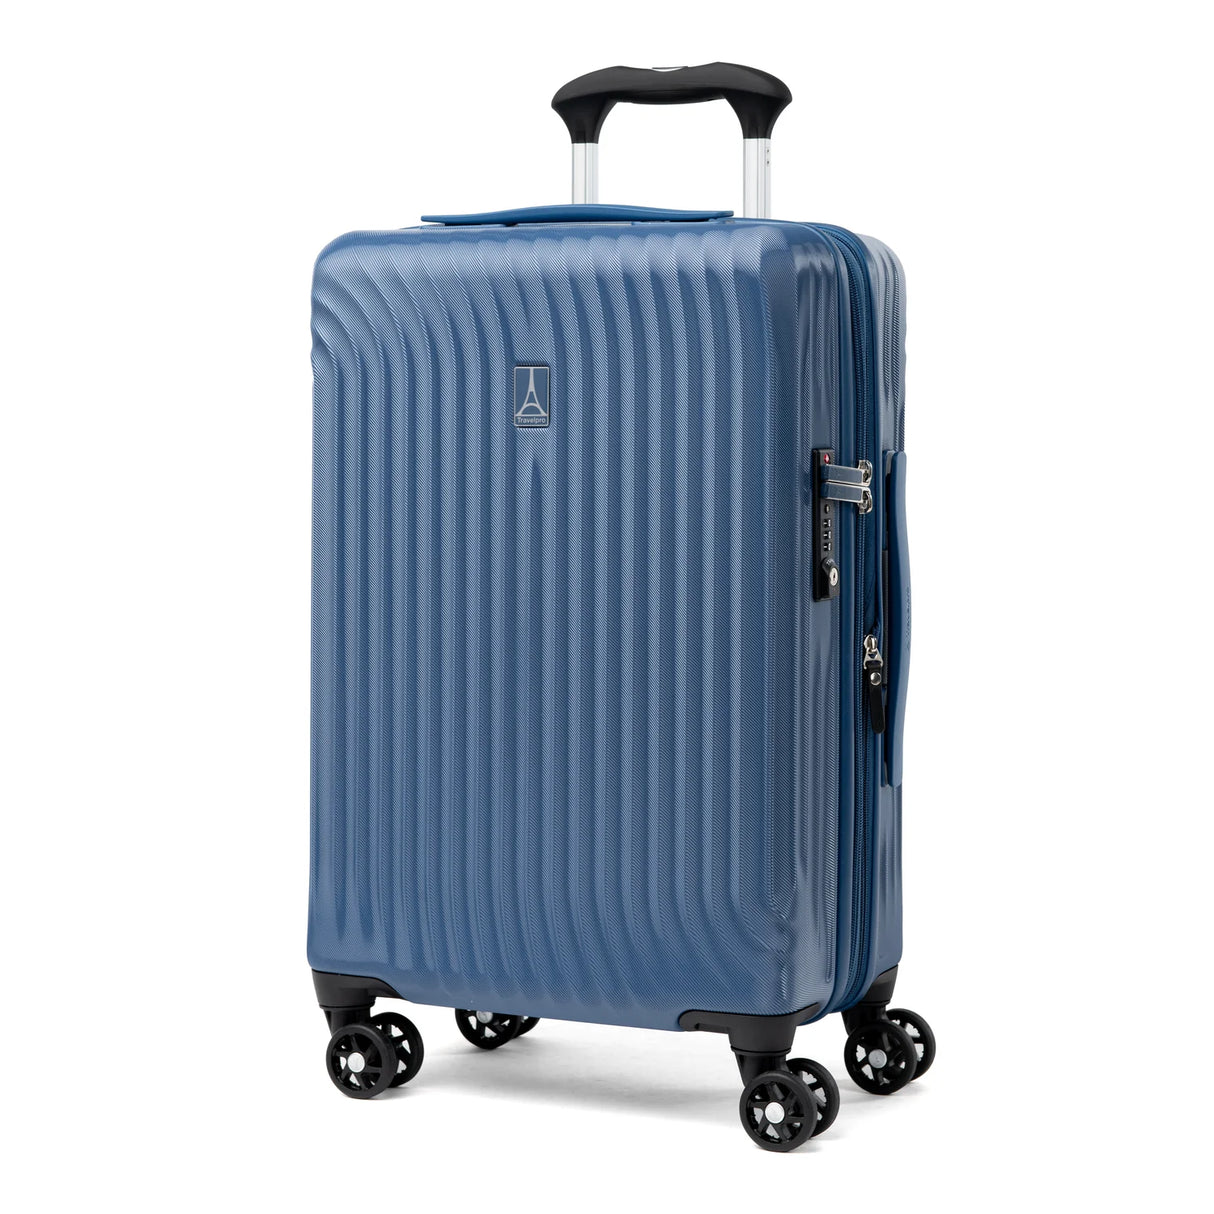 Travelpro Maxlite Air Carry-On Expandable Hardside Spinner , , 401229147_front-1500x1500-d707c29_1024x1024_2x_46a33336-a42a-4573-89b2-e098e5a34d63